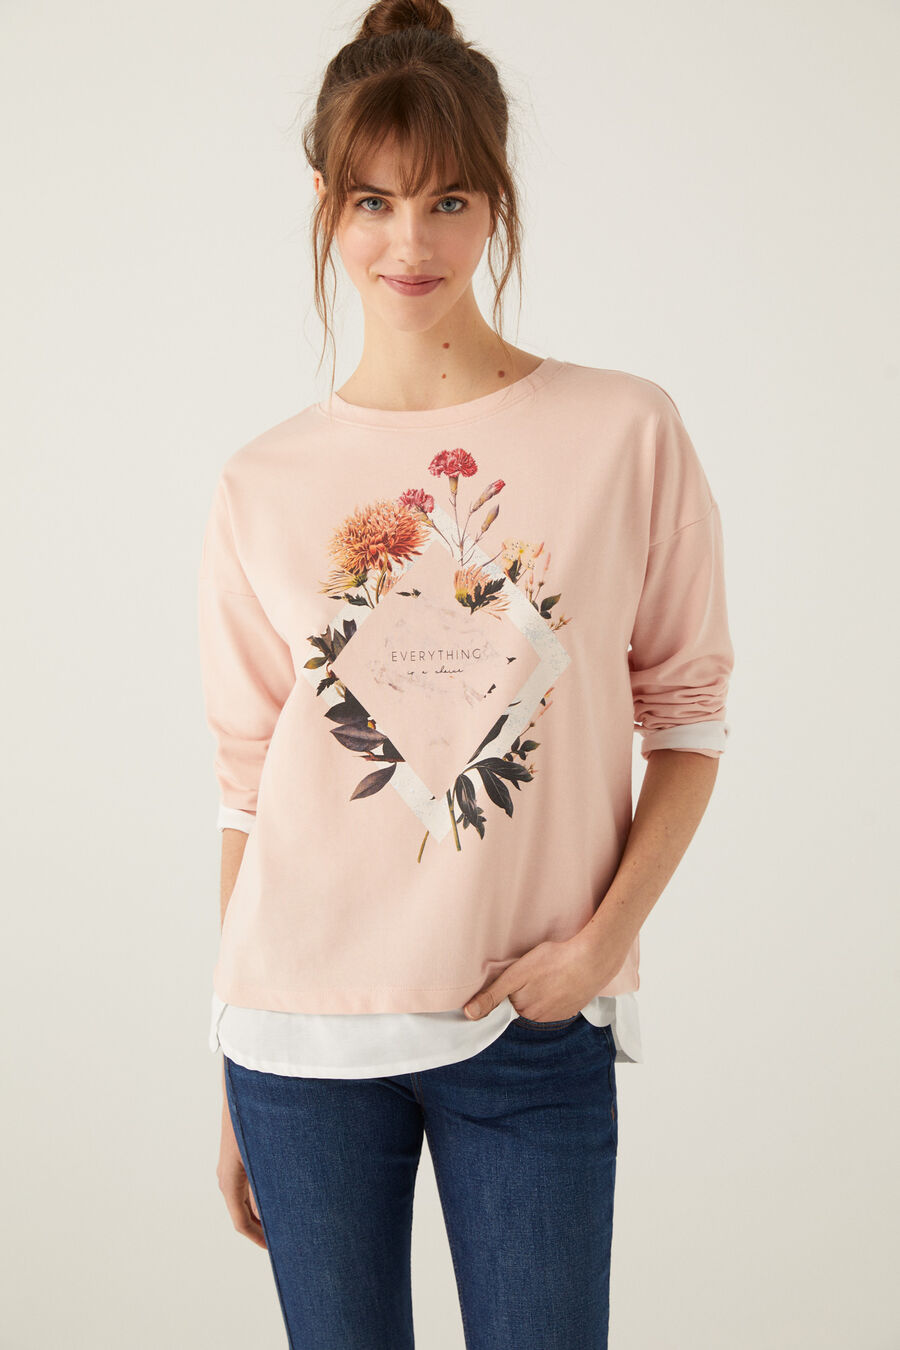 Sweat-shirt everything fleurs sauvages